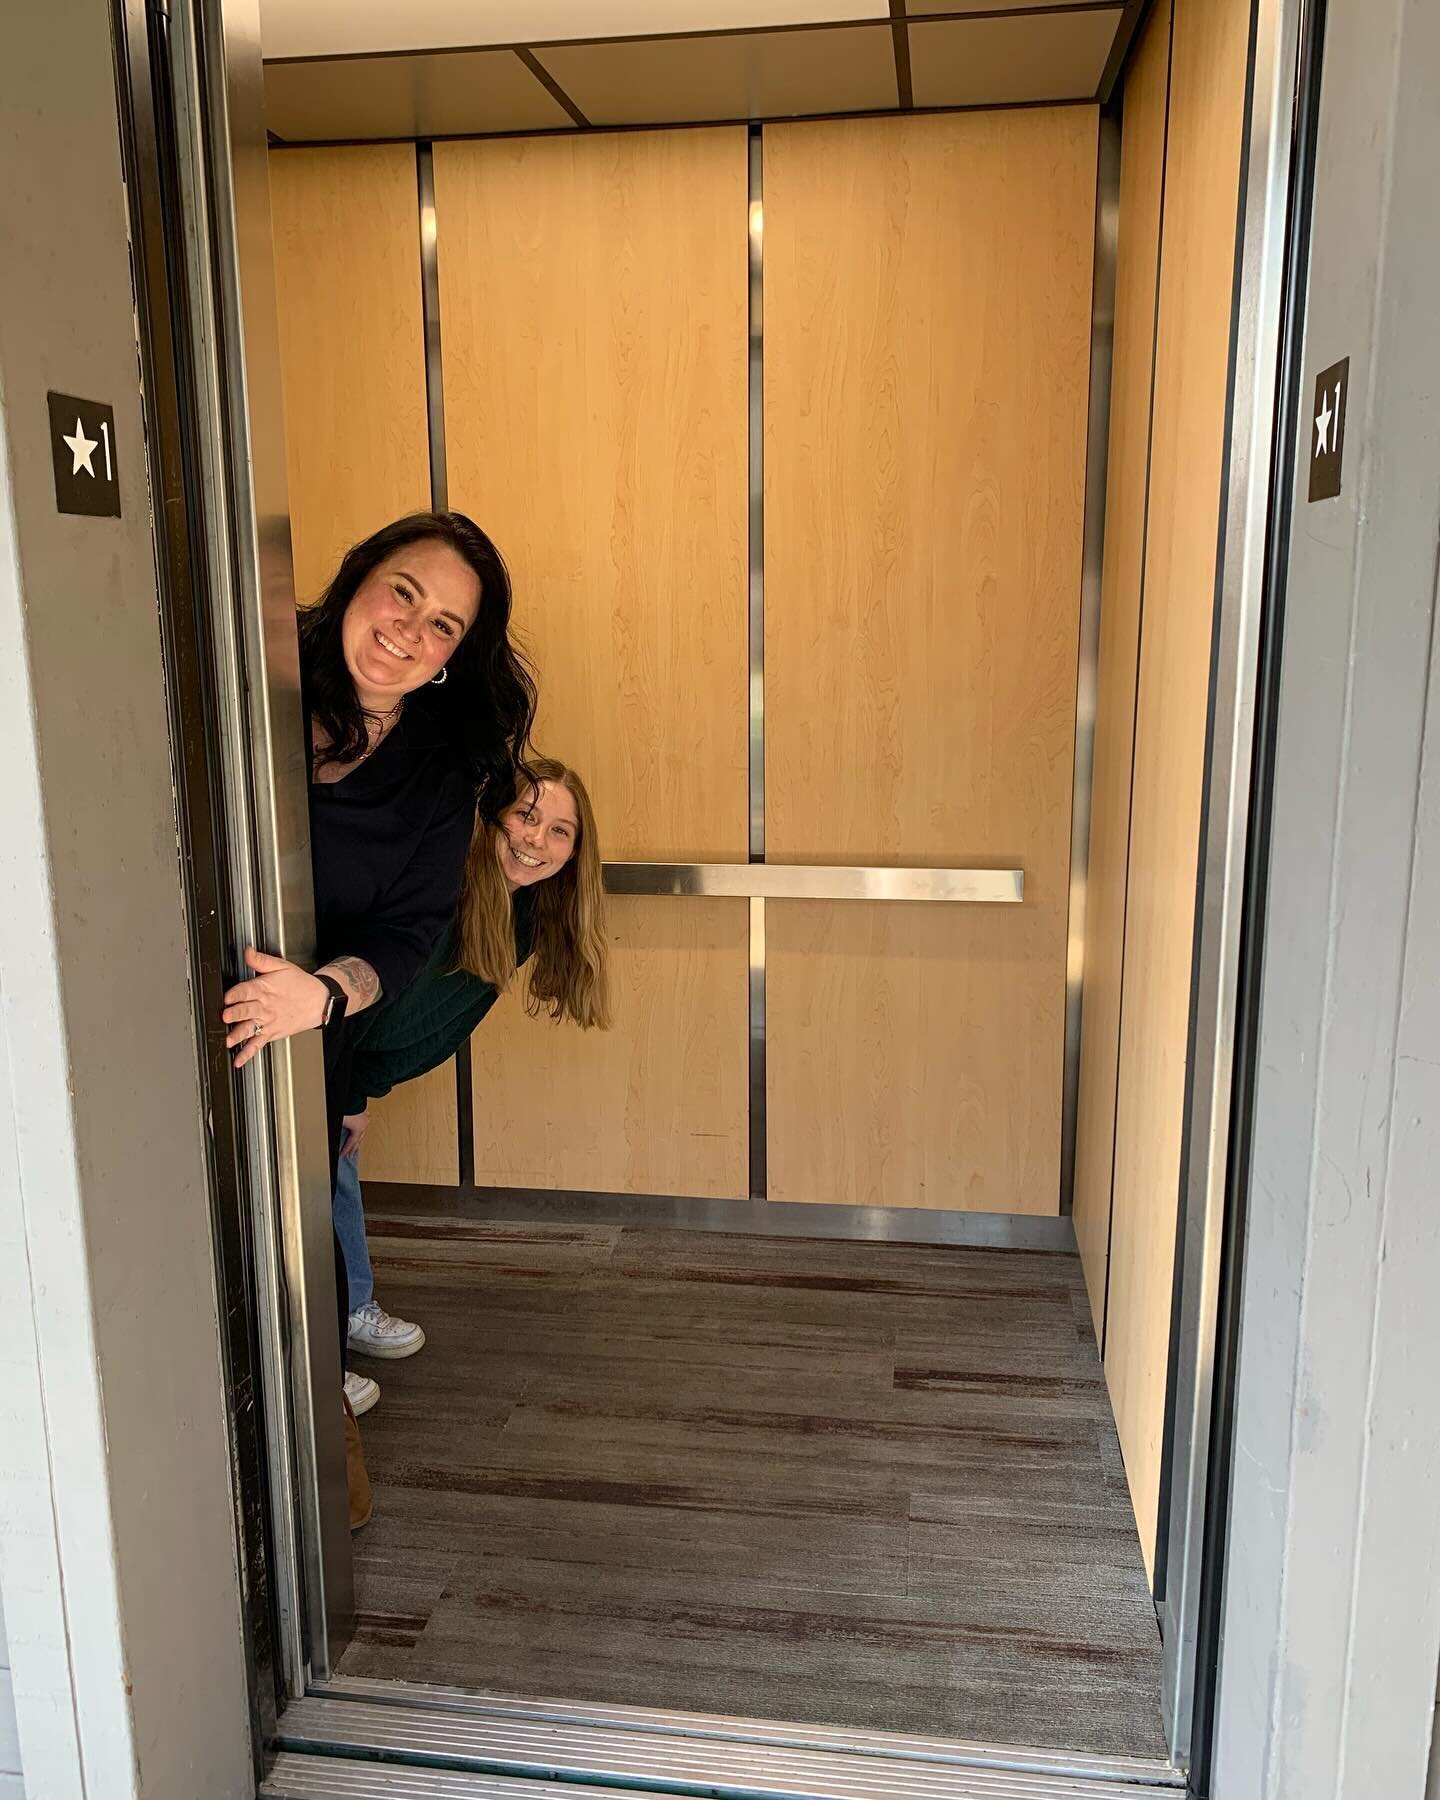 Check out some of our Rancho Cordova staff working on elevator desensitization with one of our clients! They have been practicing at home with videos, social stories and fake buttons to push. Now they are working at a real elevator!

#pals #californi